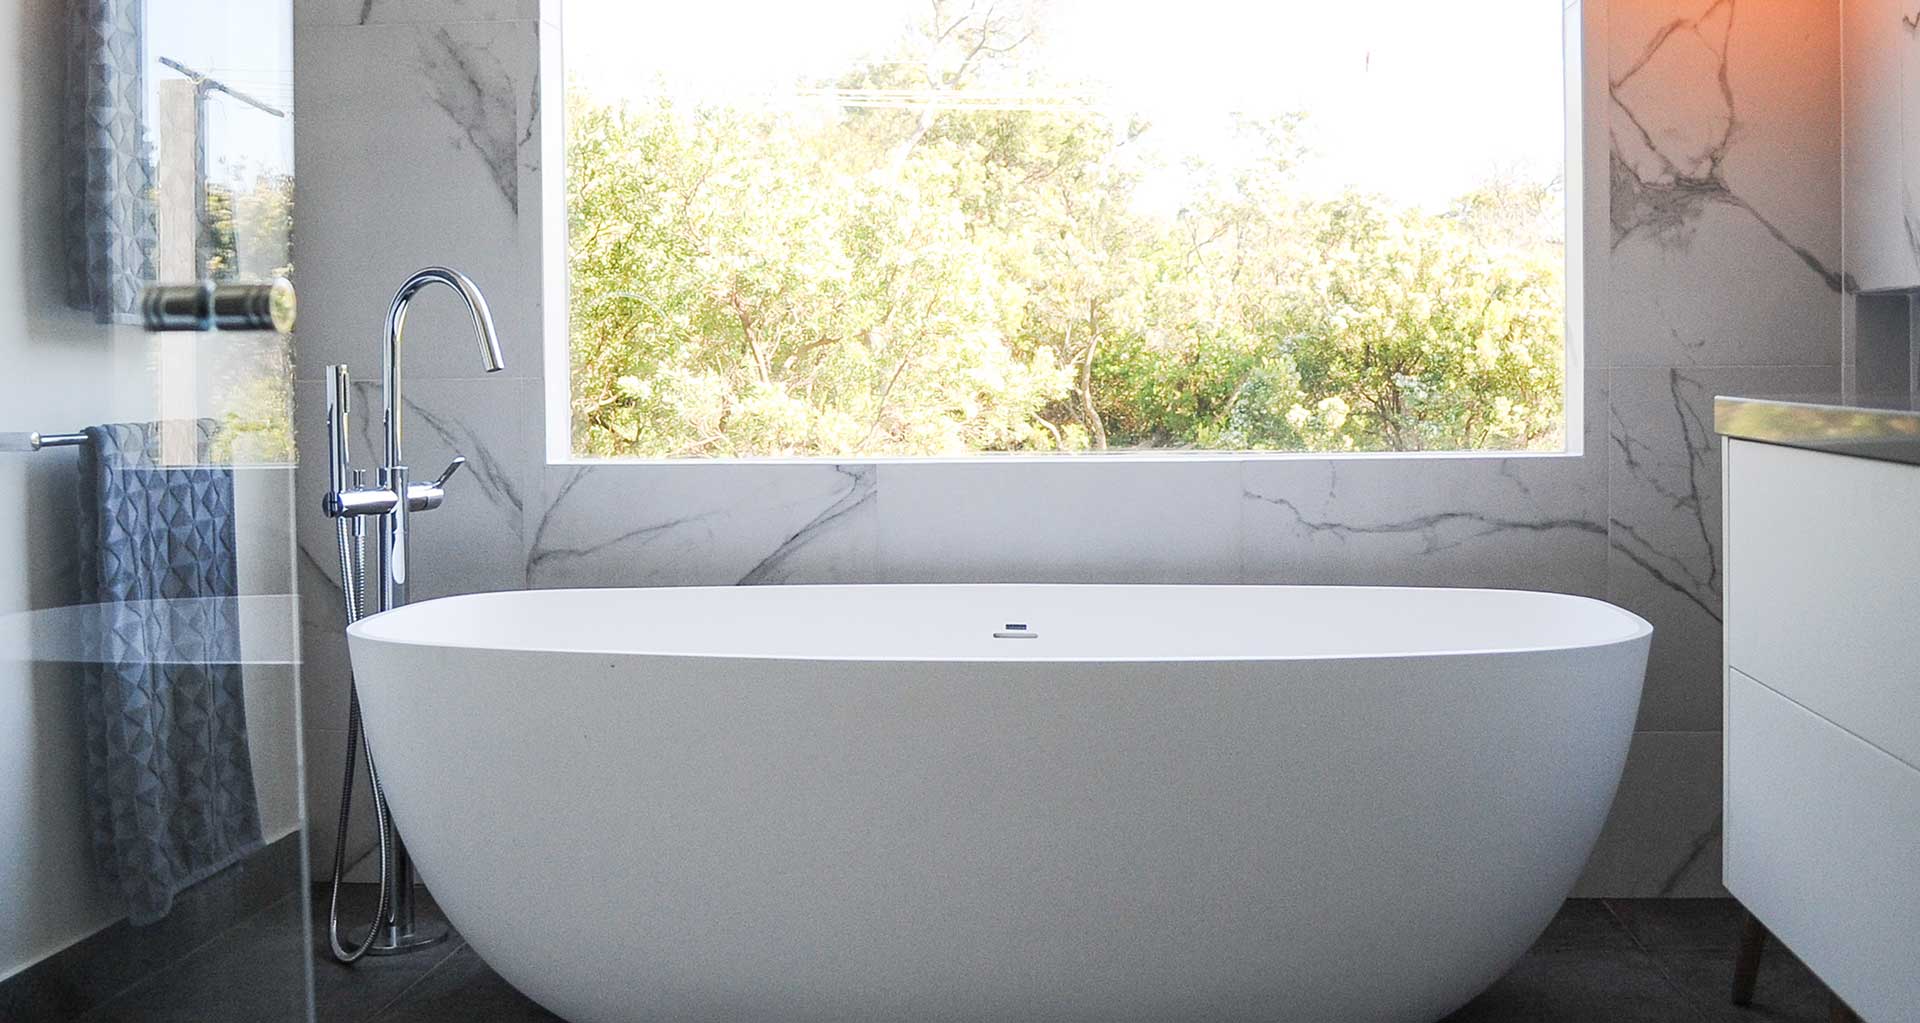 Marble bathroom renovation with freestanding bath built by Peninsula Building Projects on the Mornington Peninsula